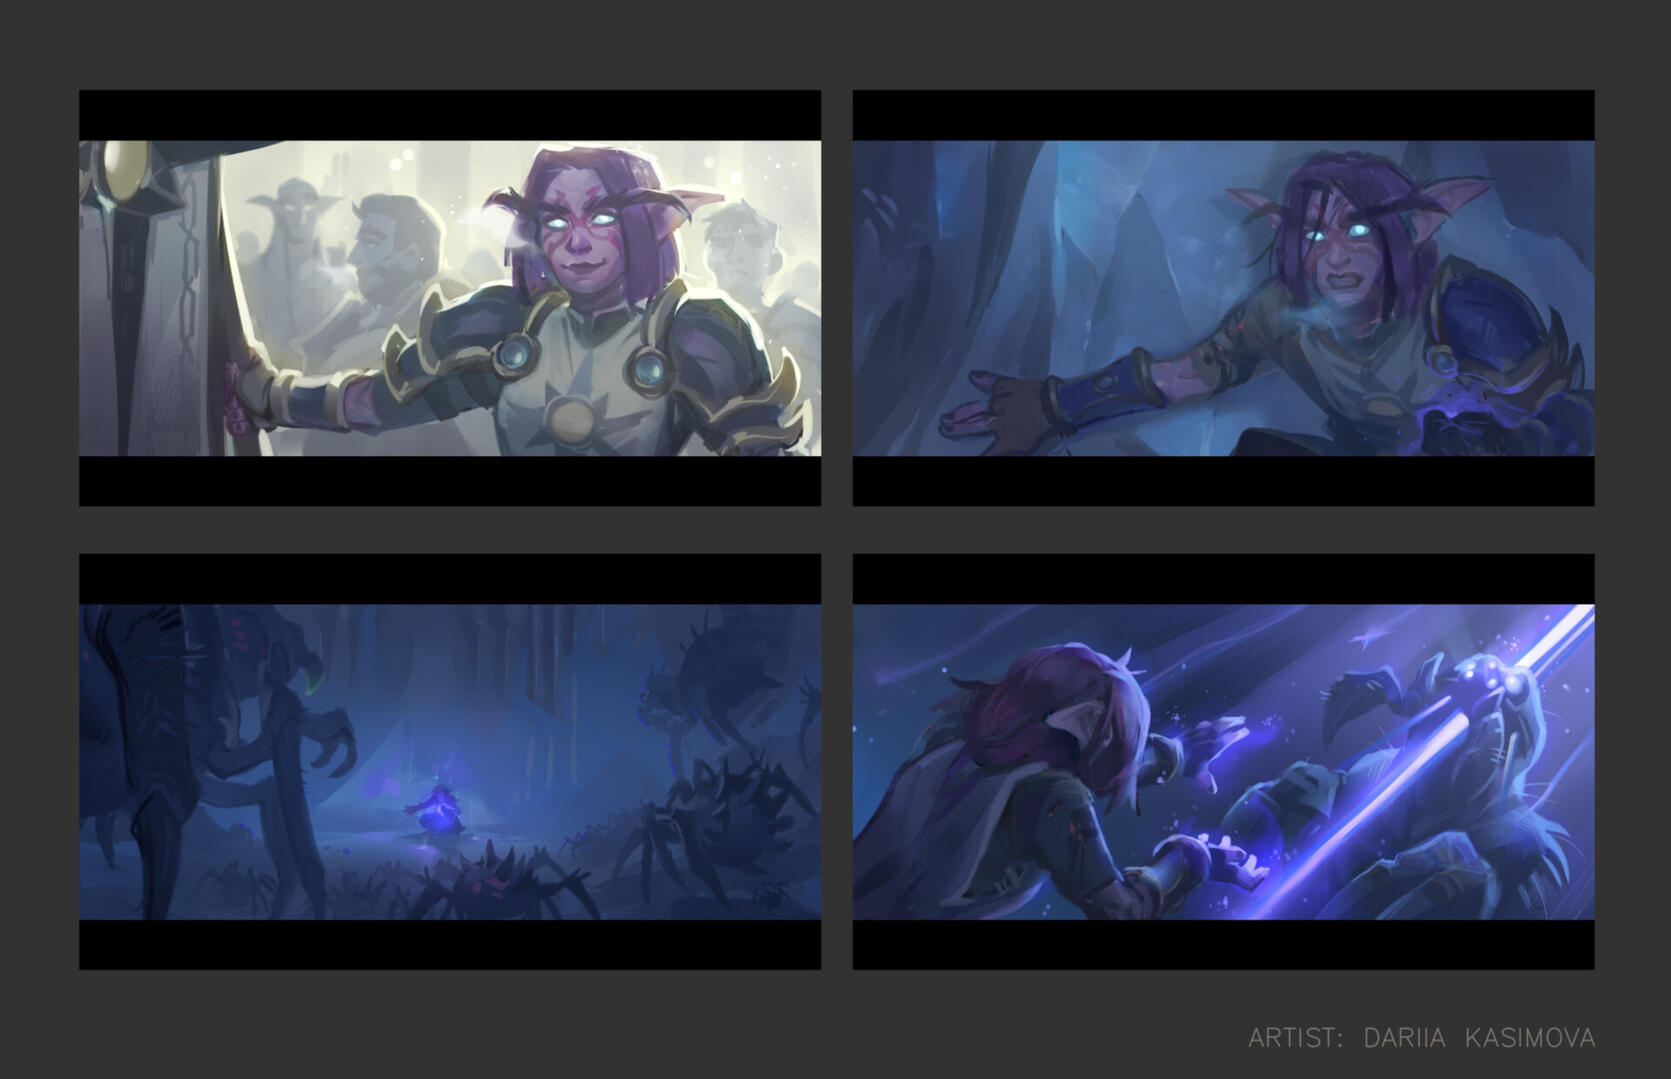 Series of drawings "The Argent Crusade" inspired by Laurel D Austin style from WoW animated shorts.